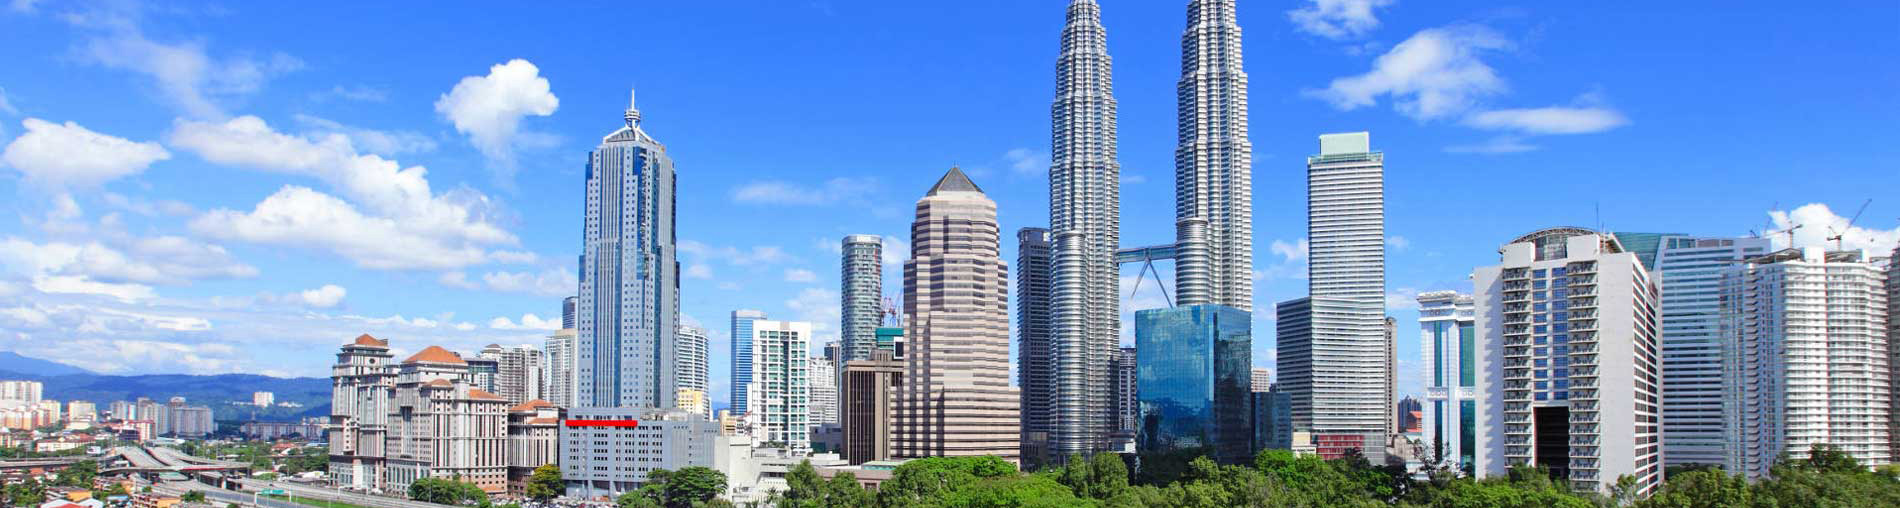 Malaysia Holiday Tour Packages From India